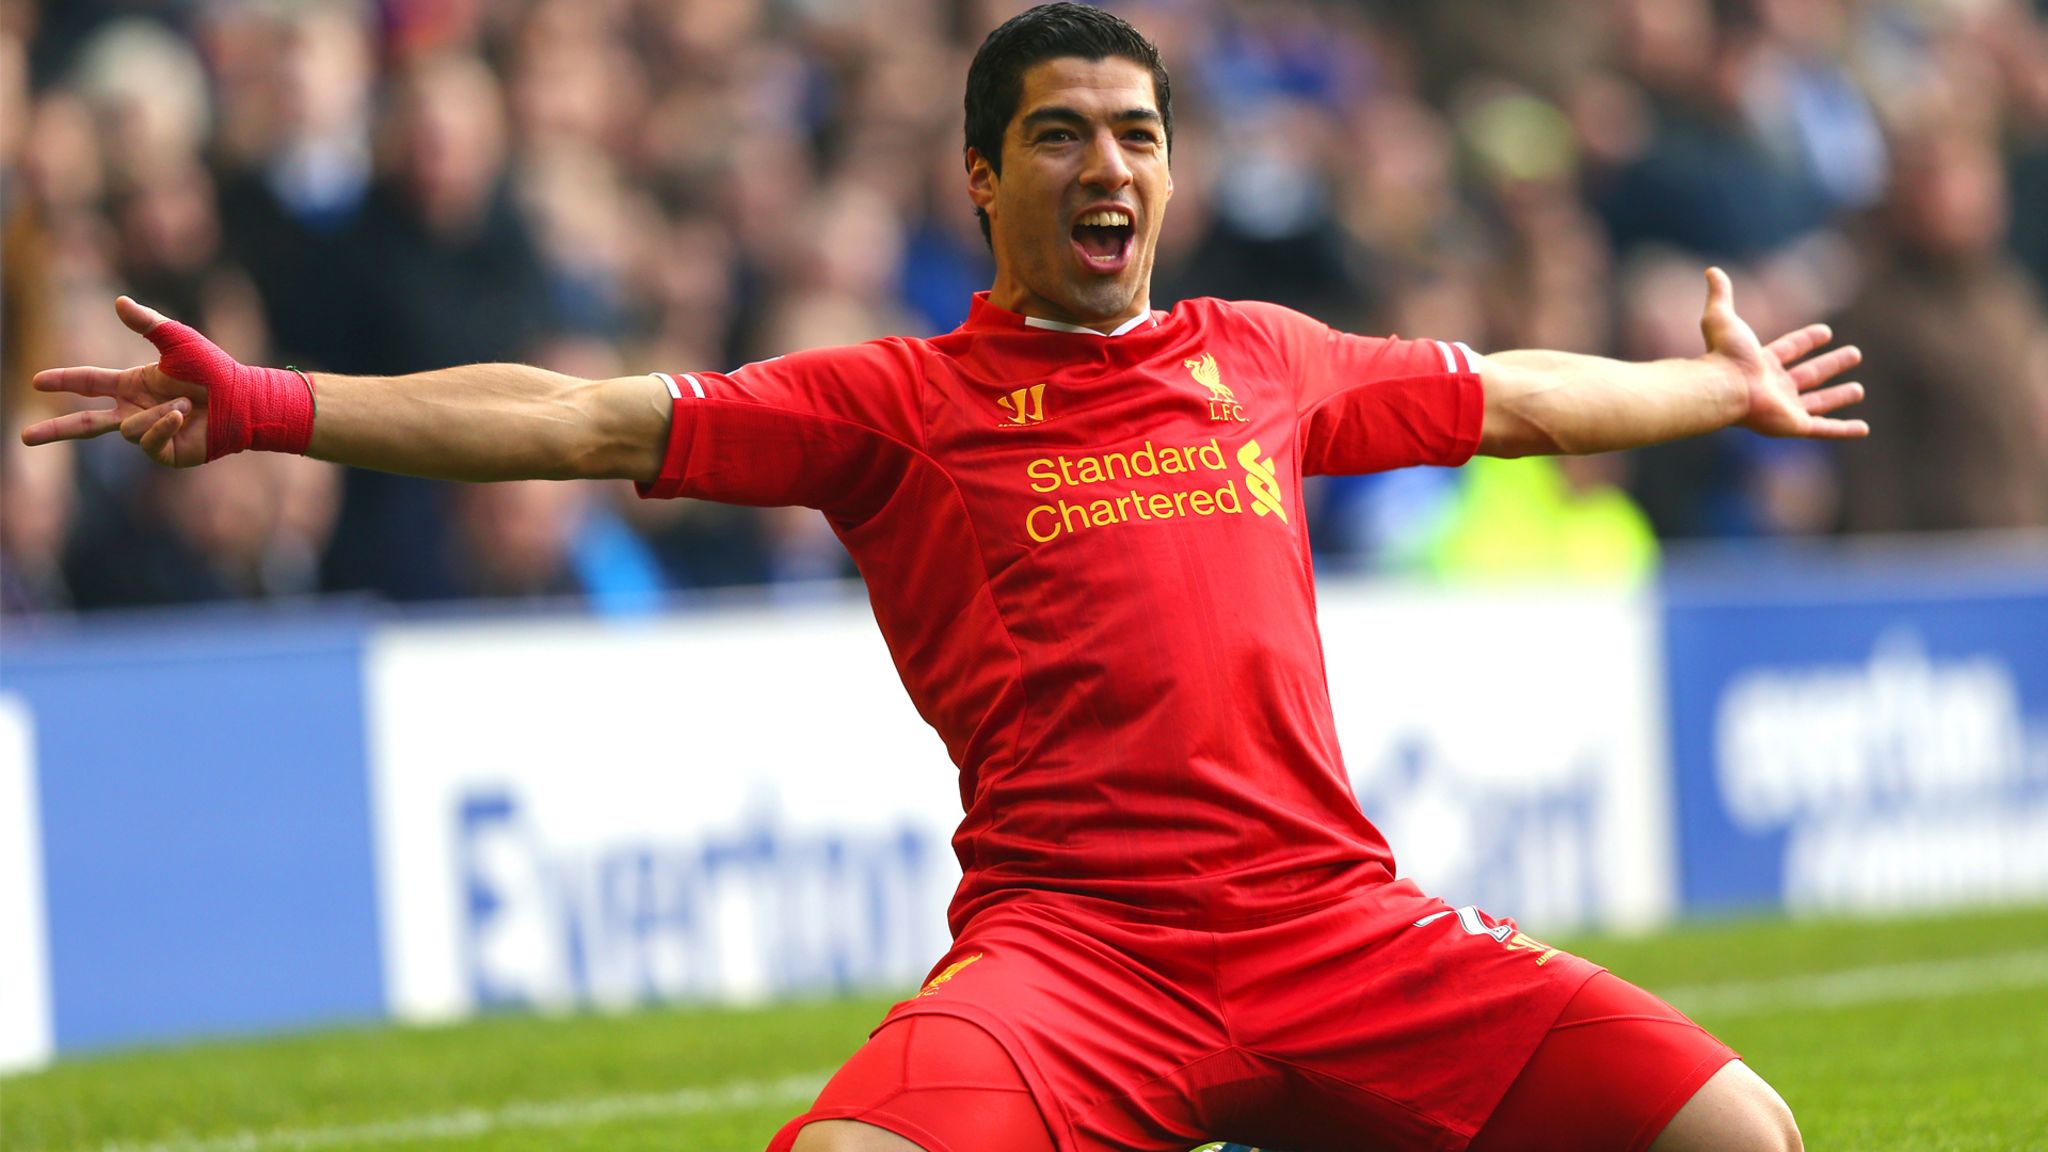 Match of the Day Top 10: Suarez, Liverpool - BBC Sport